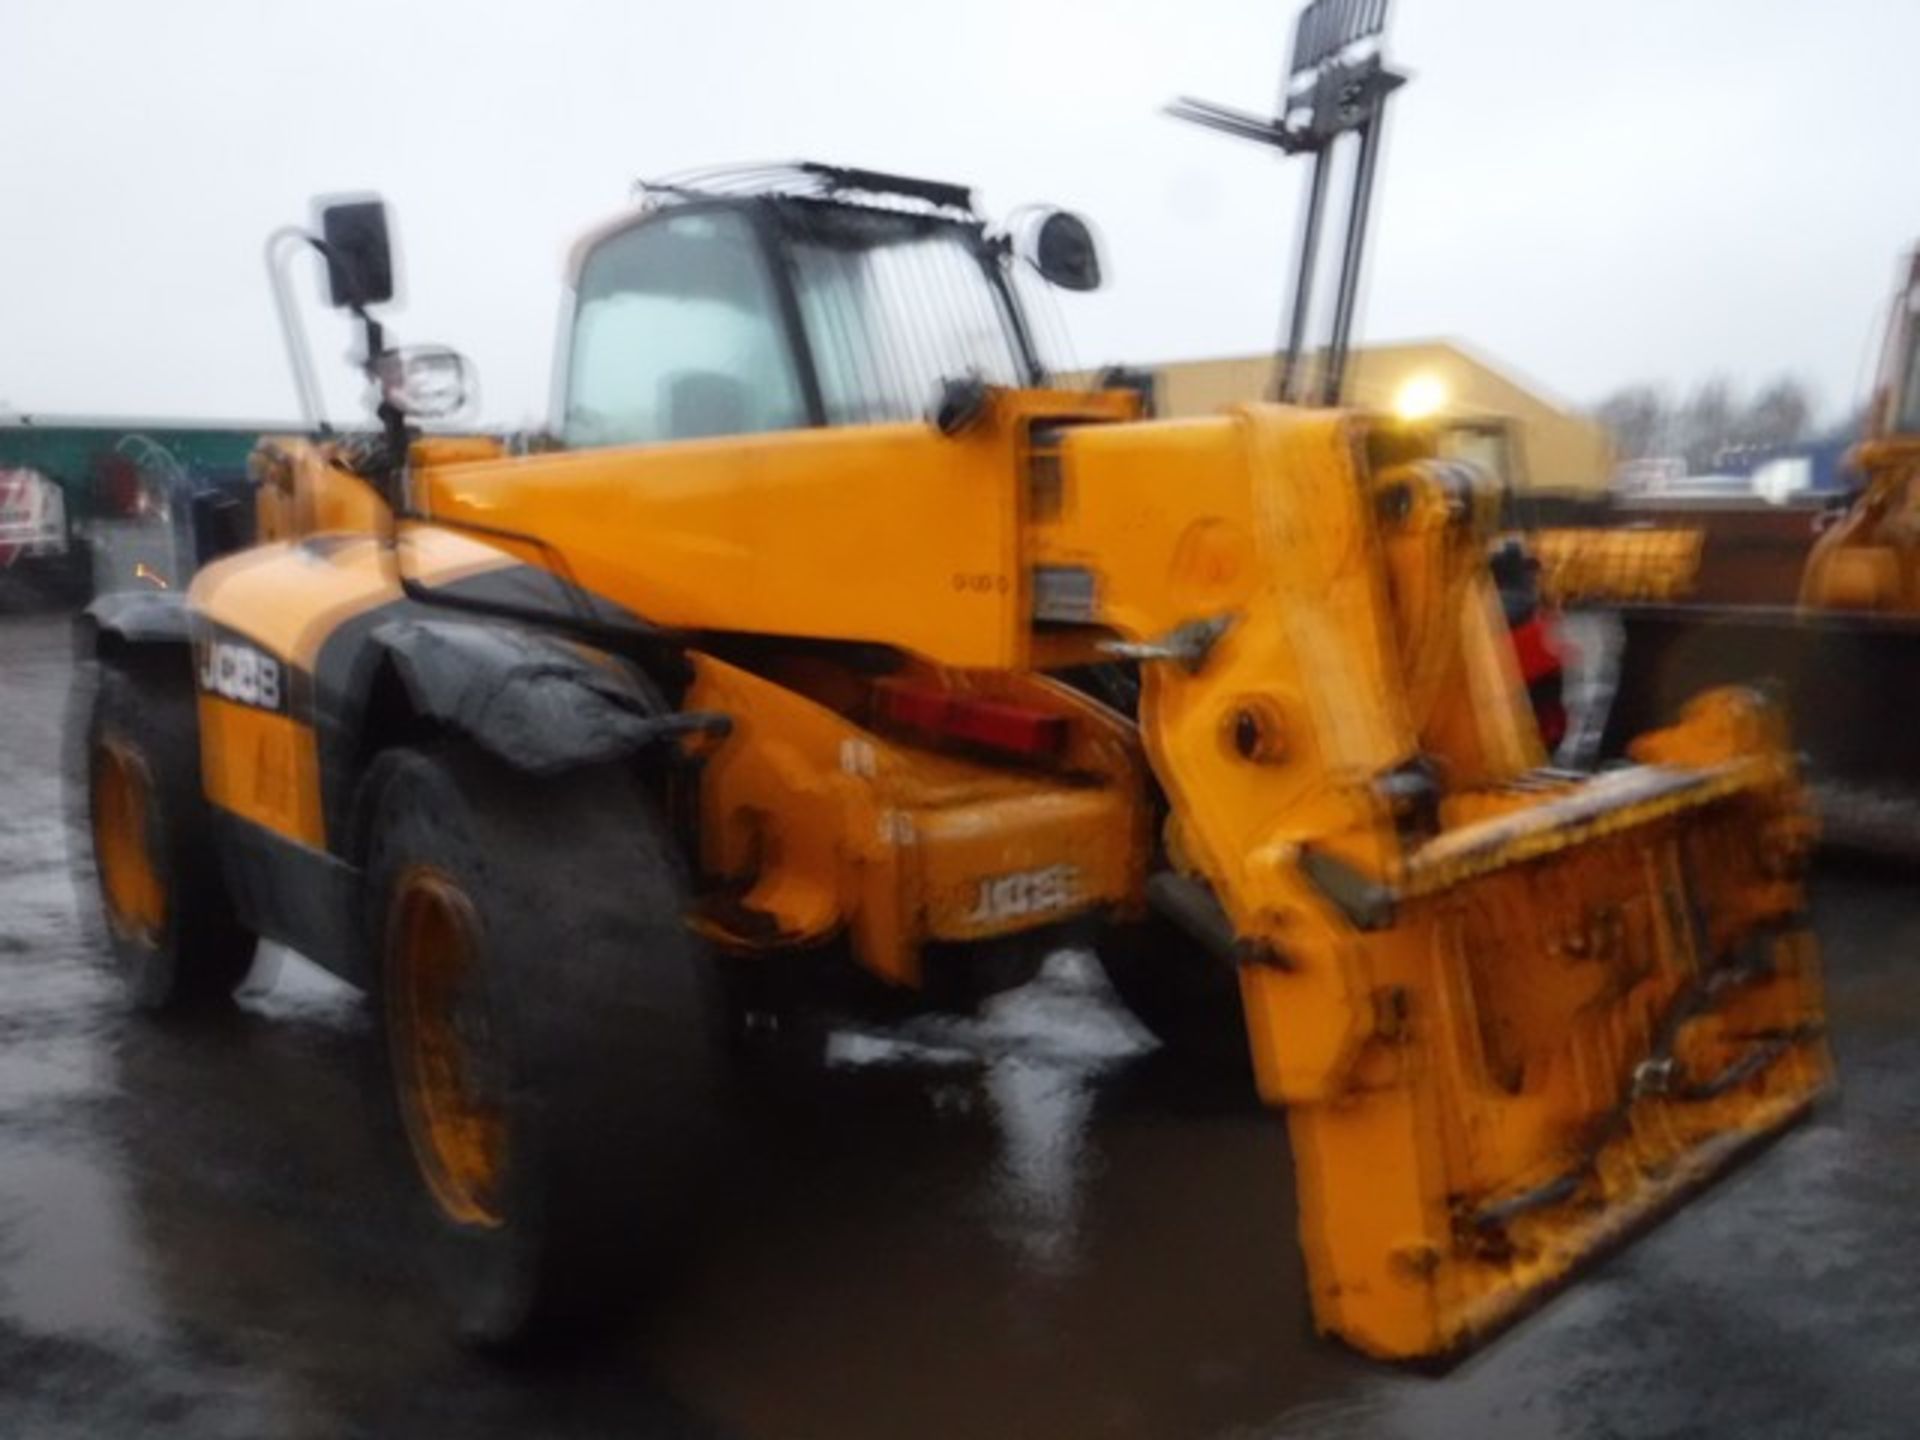 2012 JCB 550 - 80 WASTE SPECIAL TELESCOPIC HANDLER, 8870hrs (NOT VERIFIED) ON SOLID TYRES - Image 5 of 13